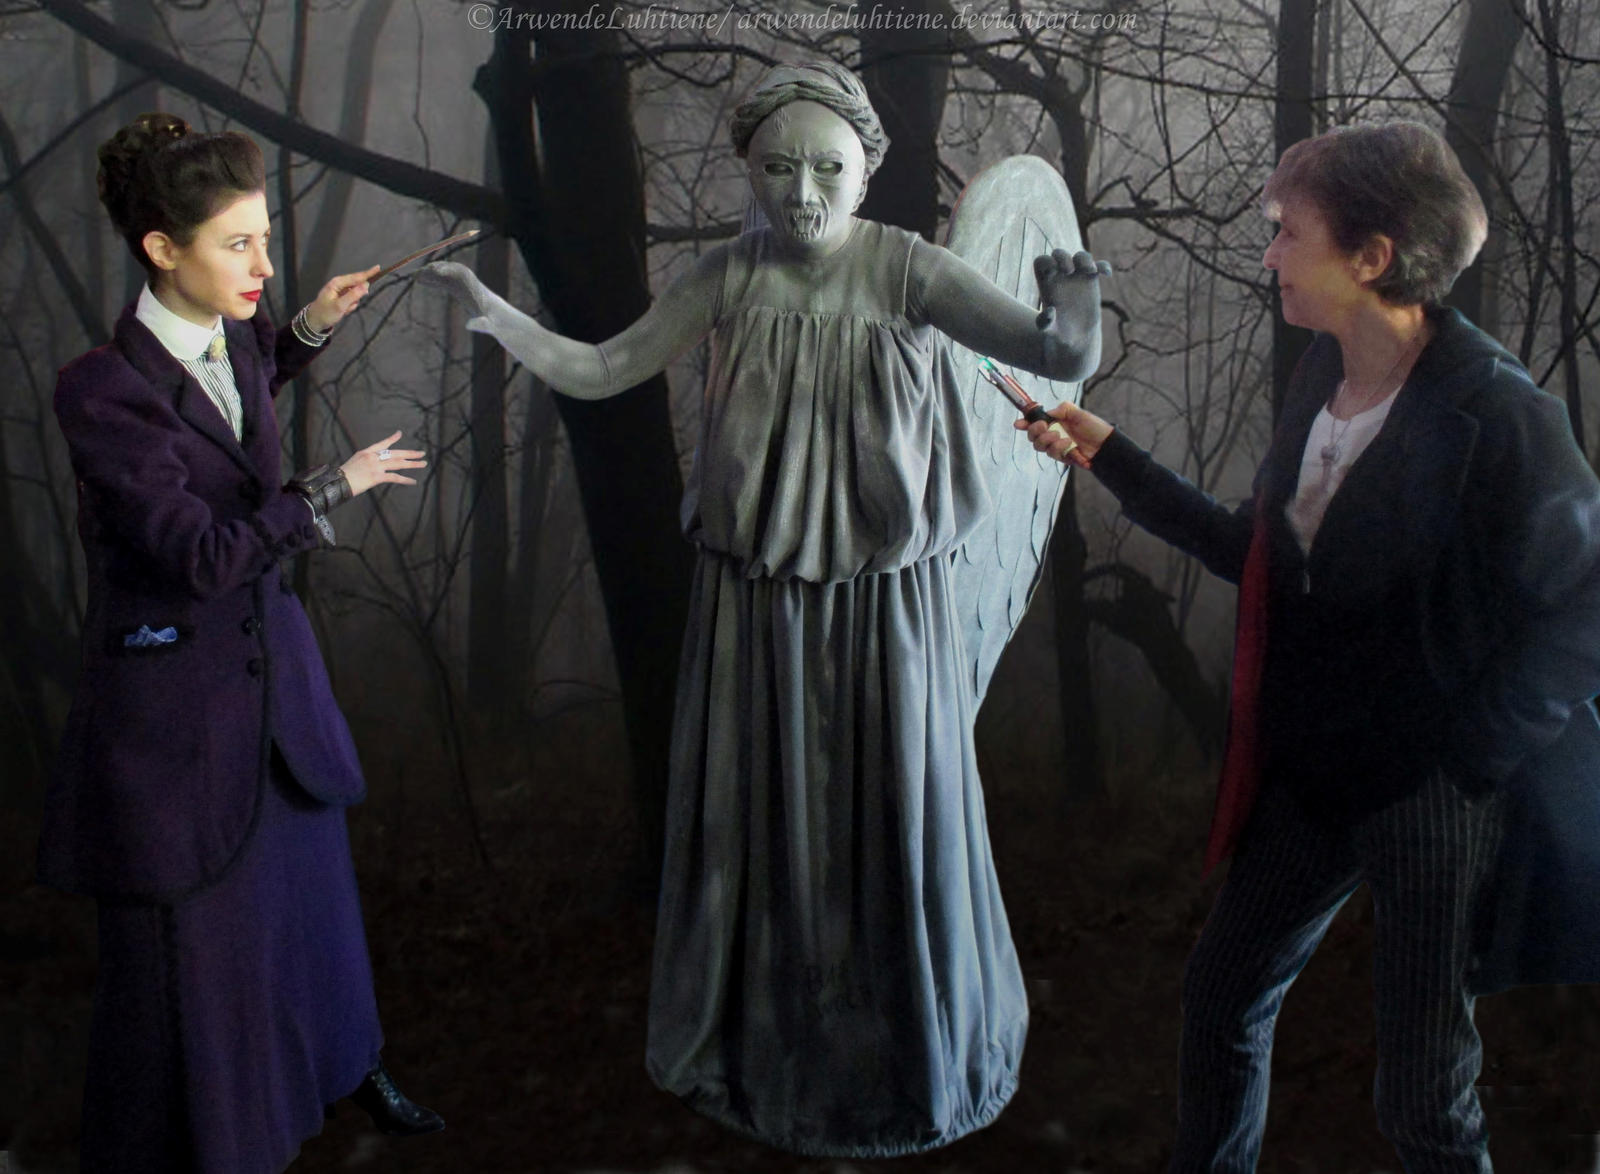 Missy cosplay - Don't blink!